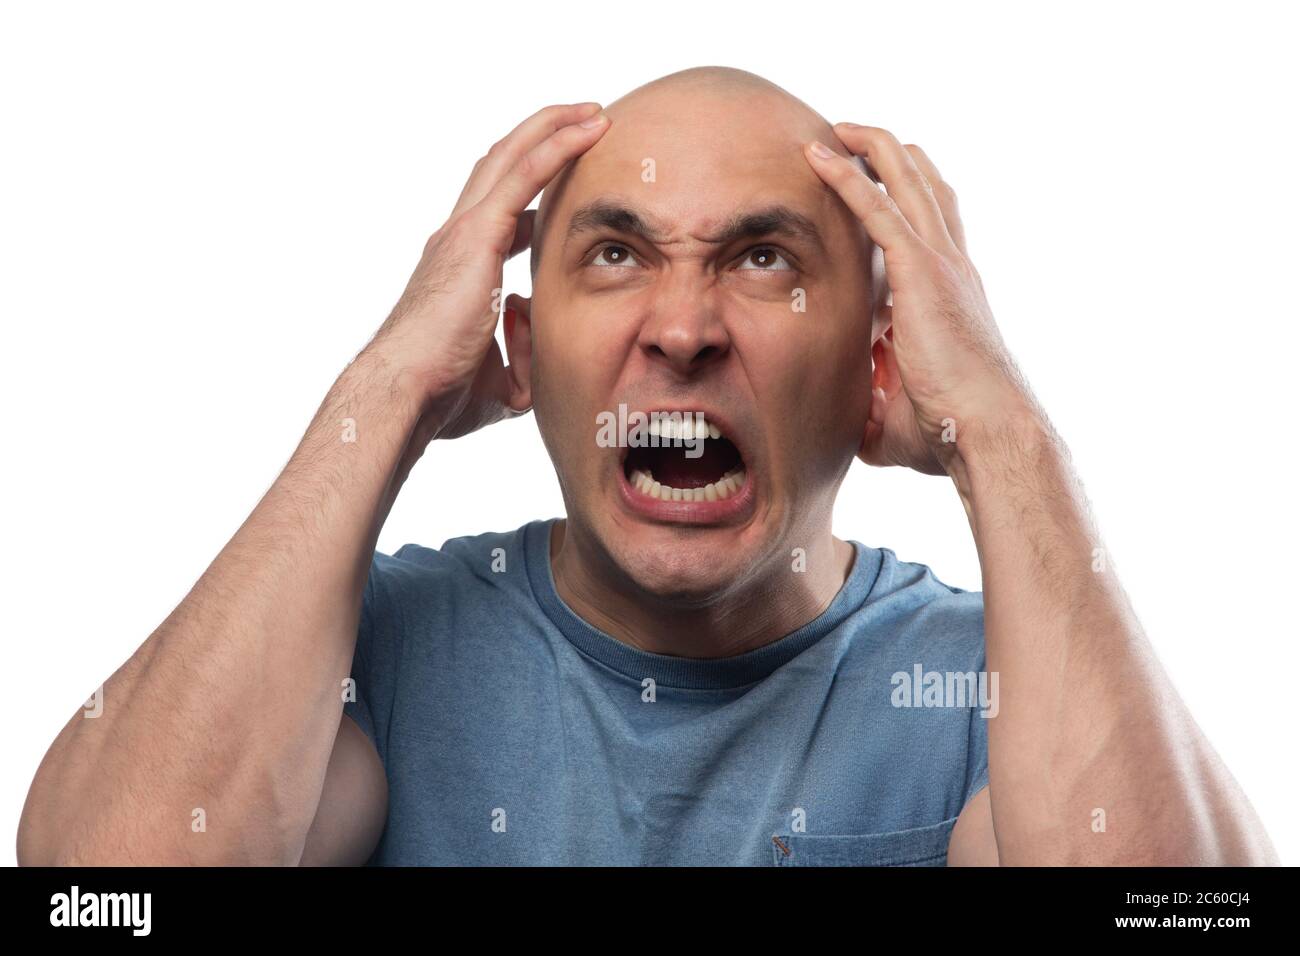 Photo of young bald angry screaming man Stock Photo